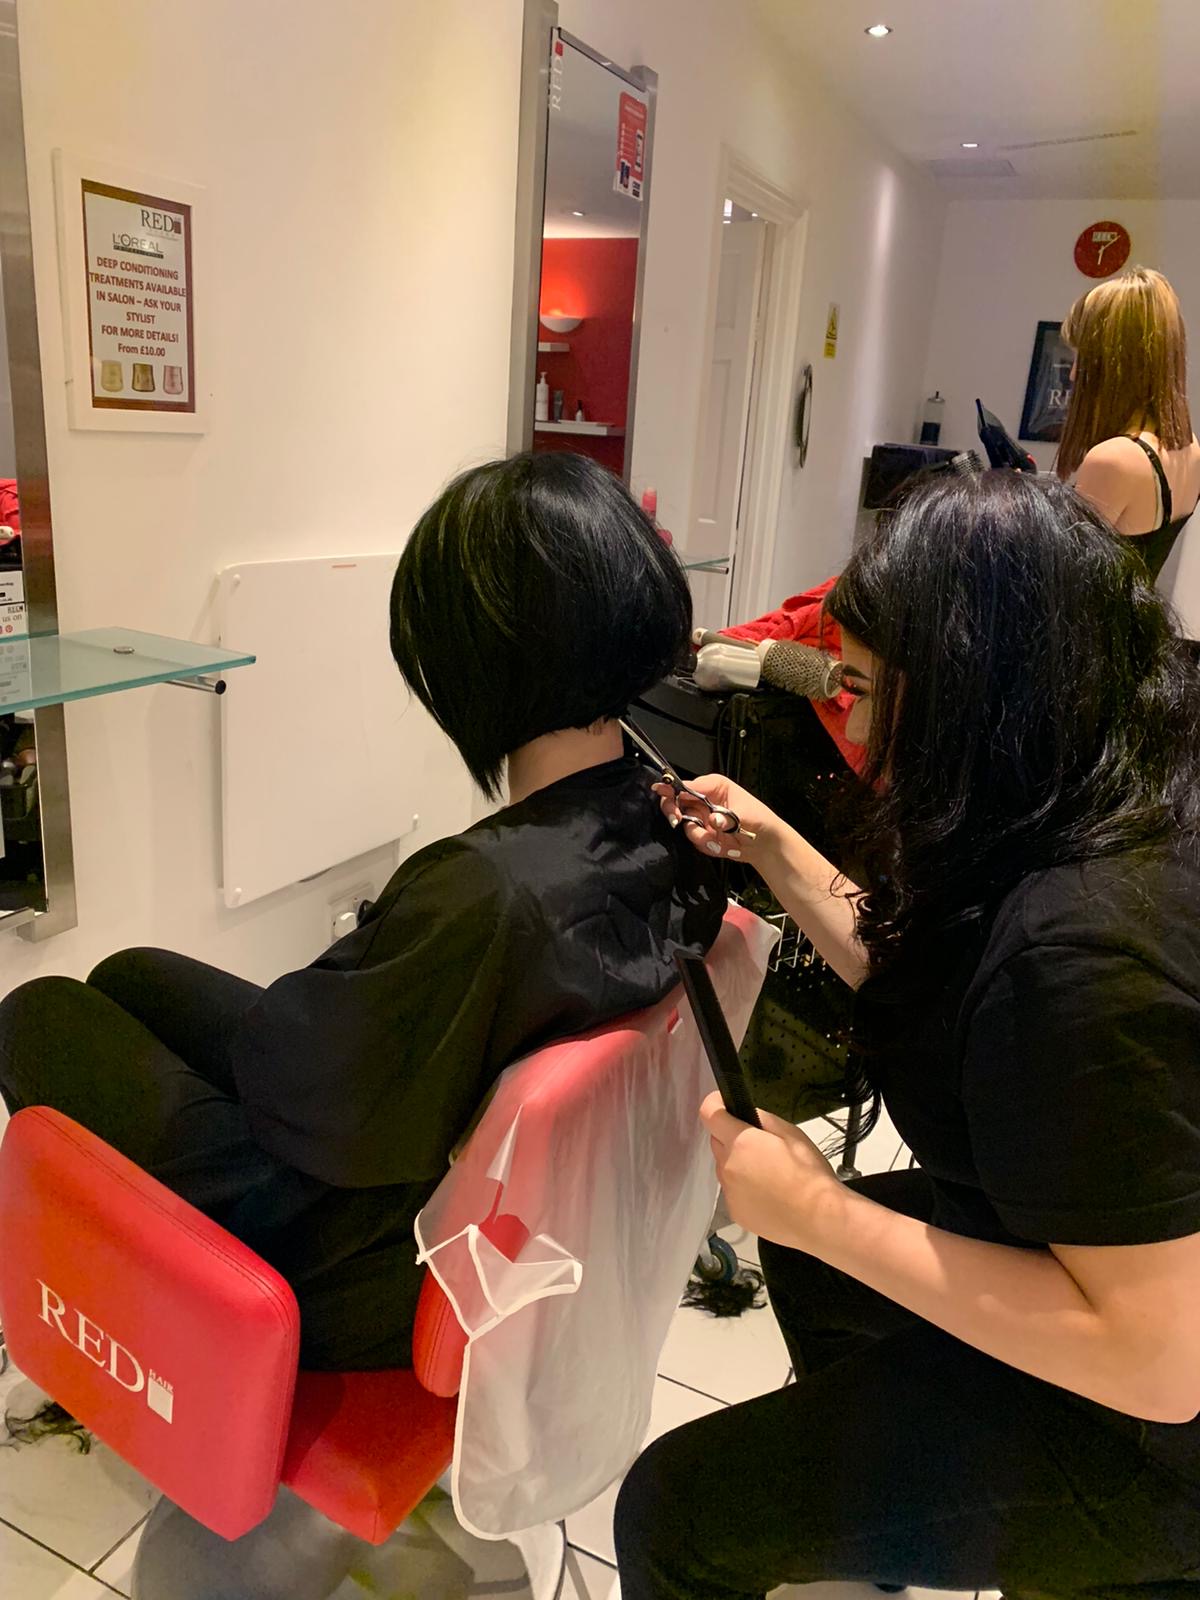 Hairdresser training, HAIRDRESSING ACADEMY, RED HAIR SALONS, RYE, BATTLE AND HASTINGS, EAST SUSSEX